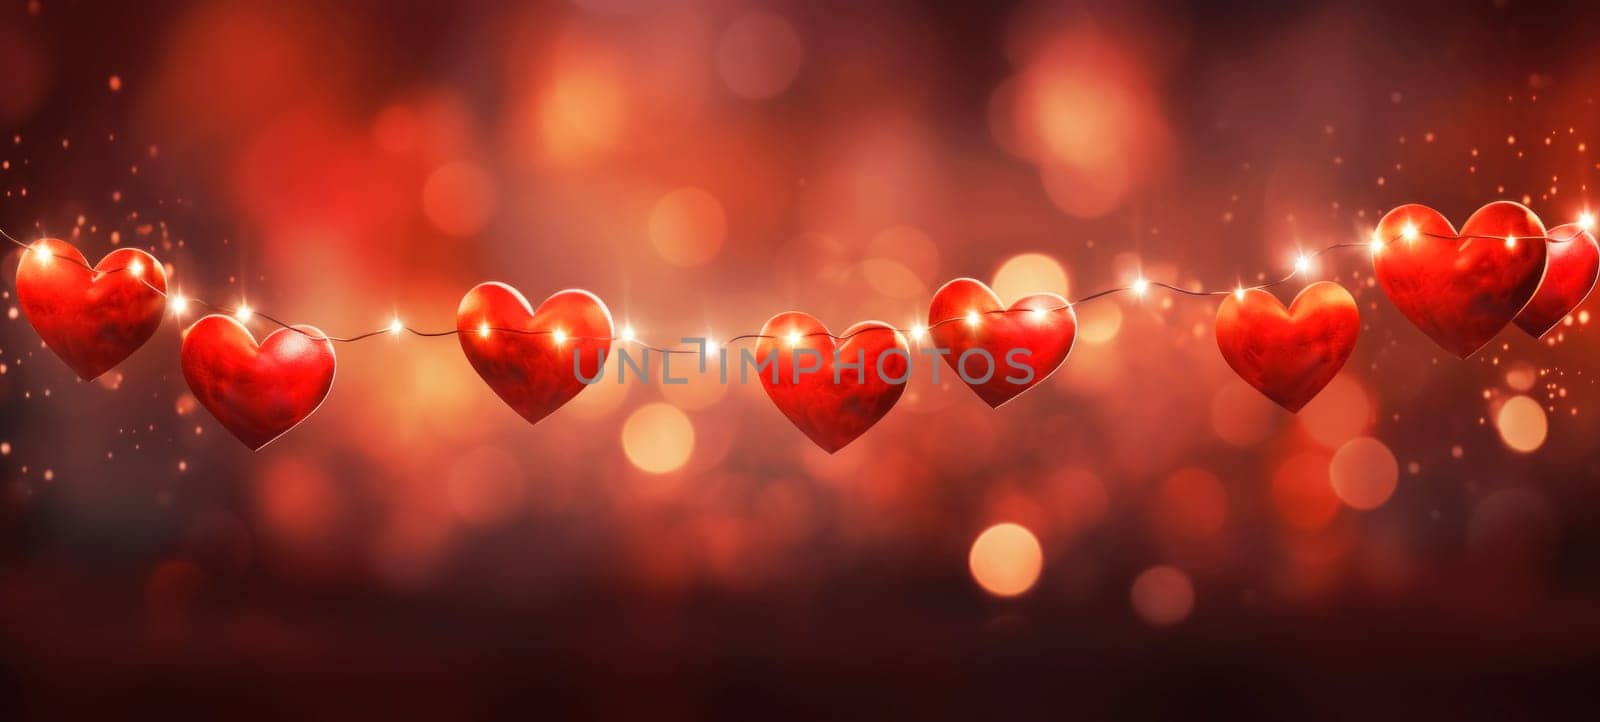 Heart-Shaped Balloons with Lights on Dark Background by andreyz